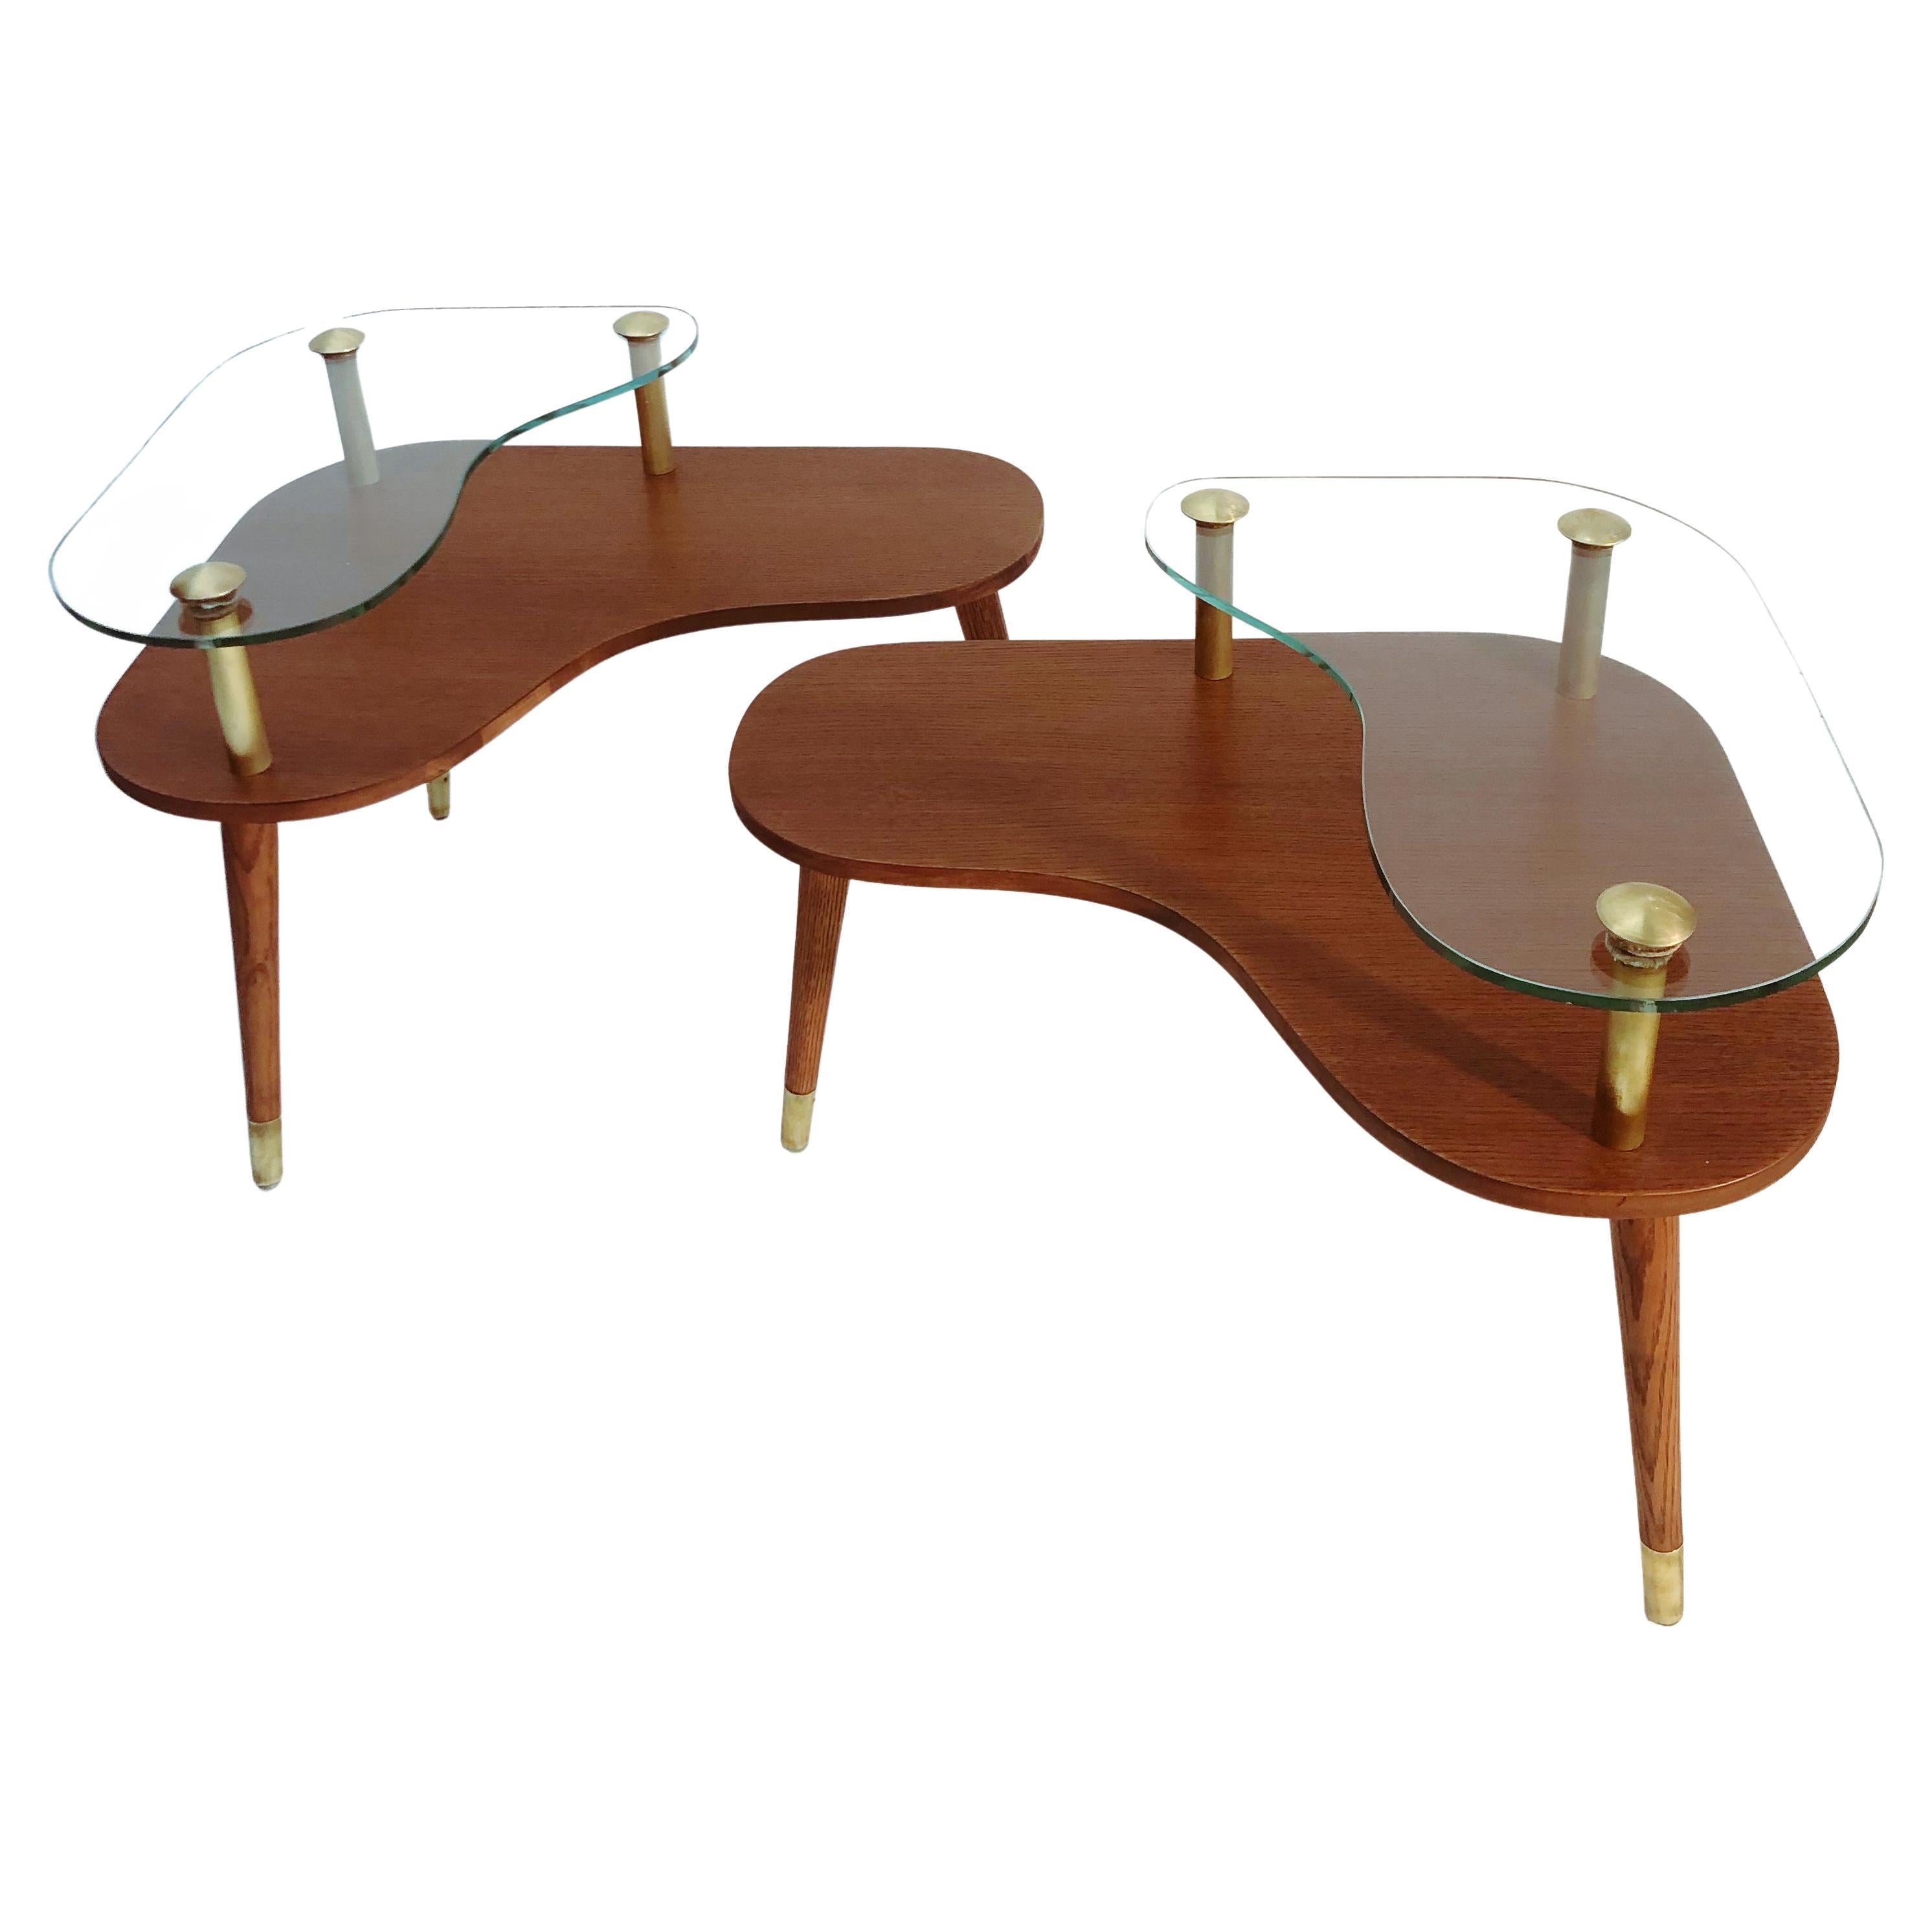 Pair of Sculptural Mid-Century Modern Side Tables, circa 1960 For Sale